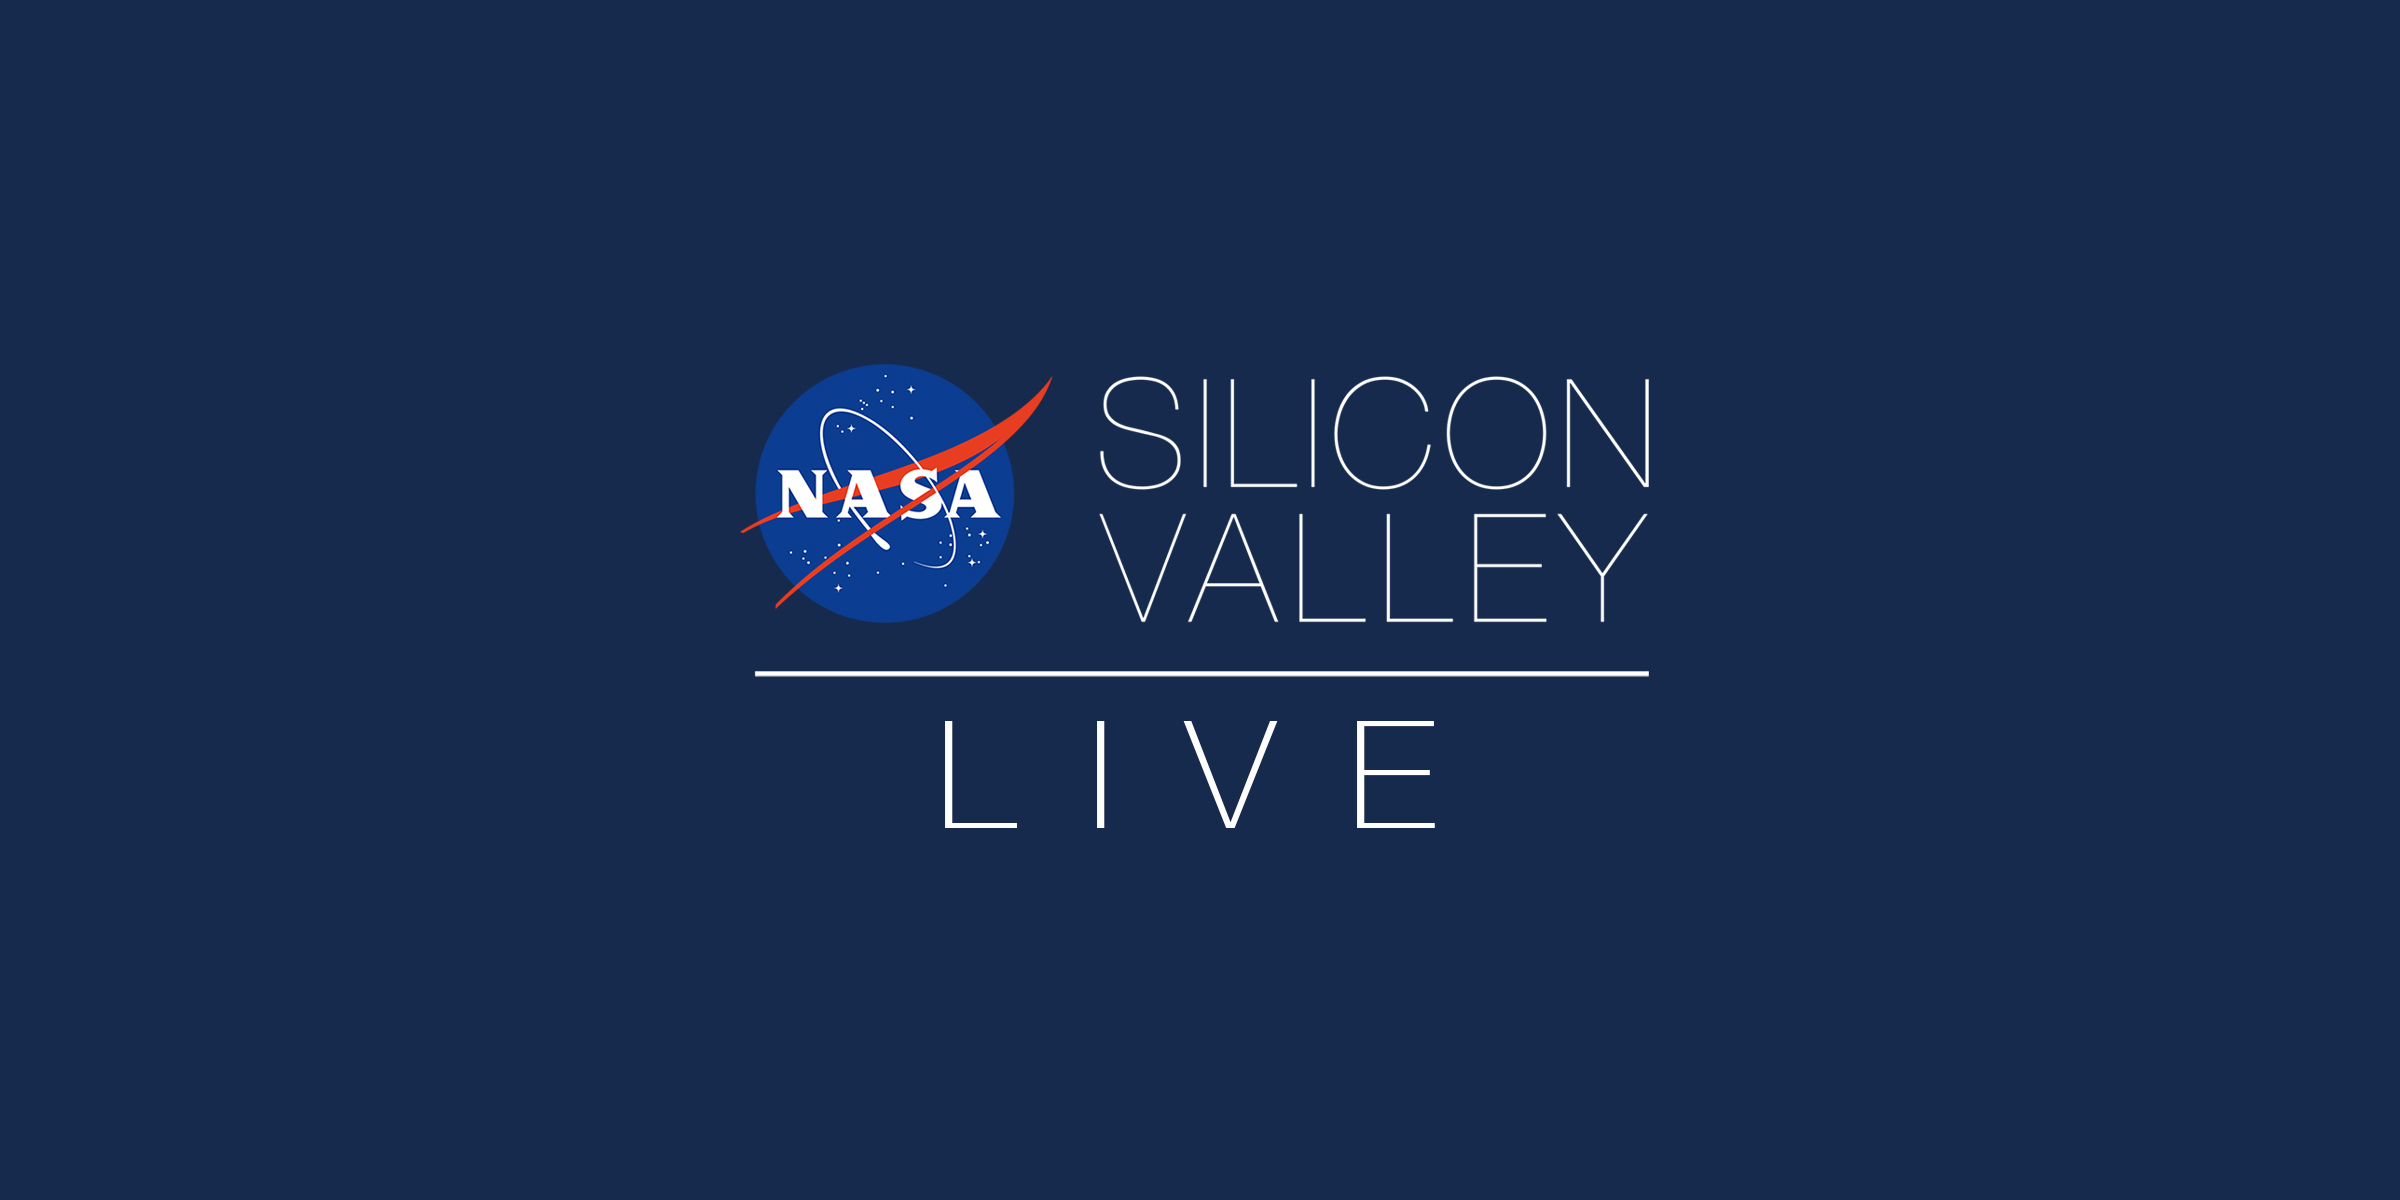 NASA in Silicon Valley Live - Halloween Costume and Cosplay Contest